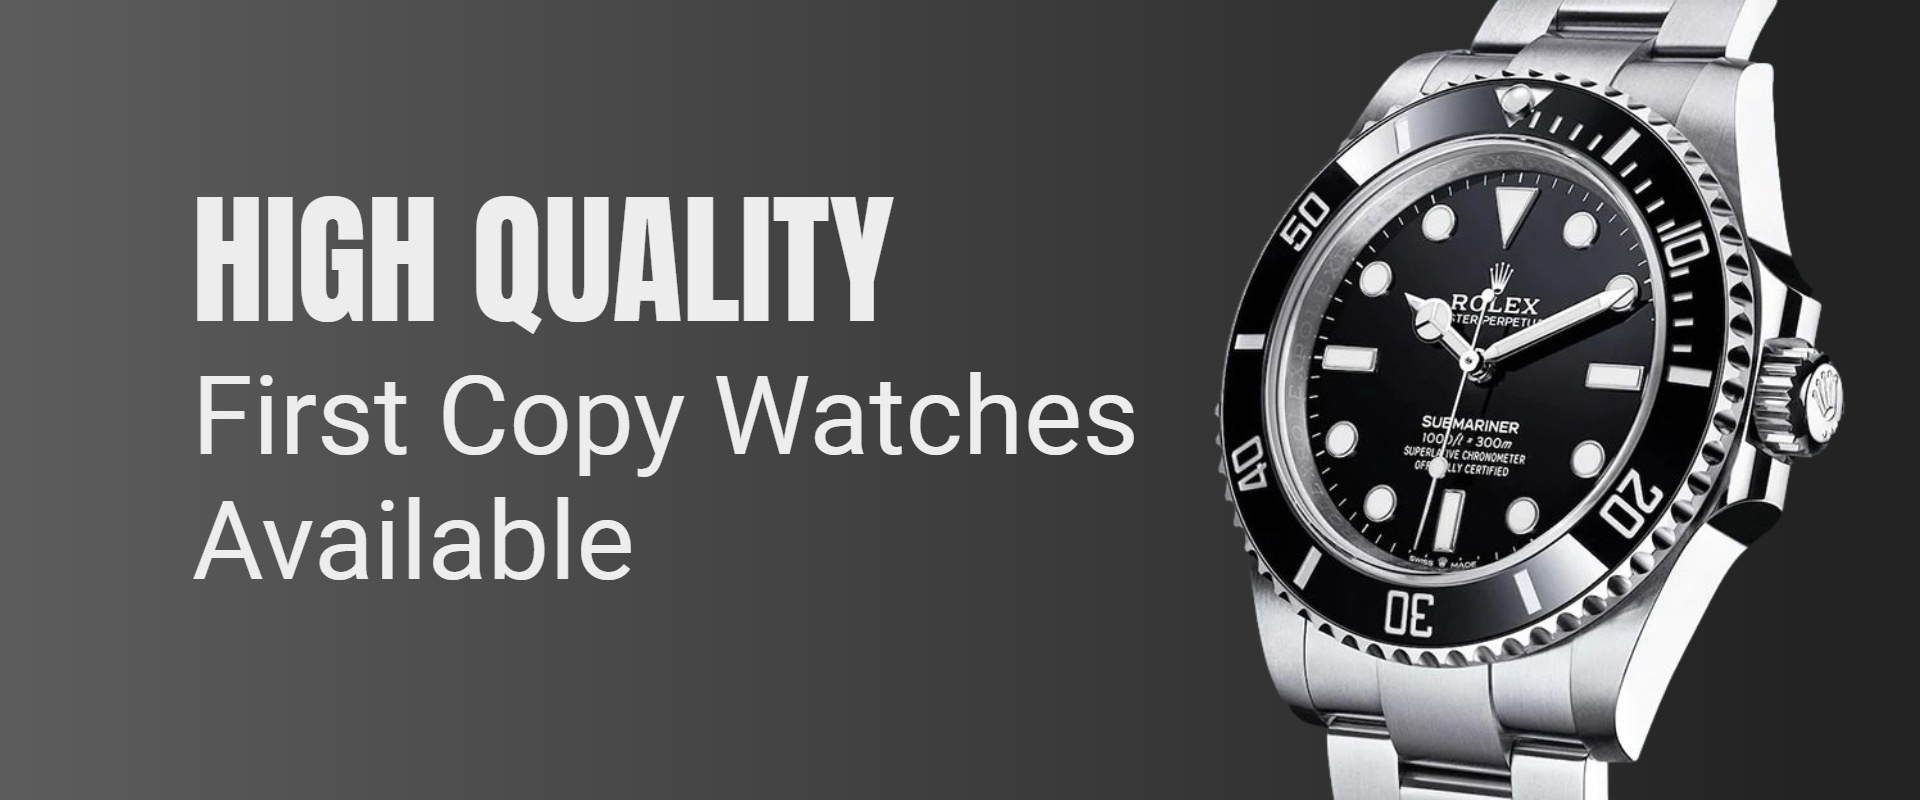 First Copy Watches in India | Watchmall